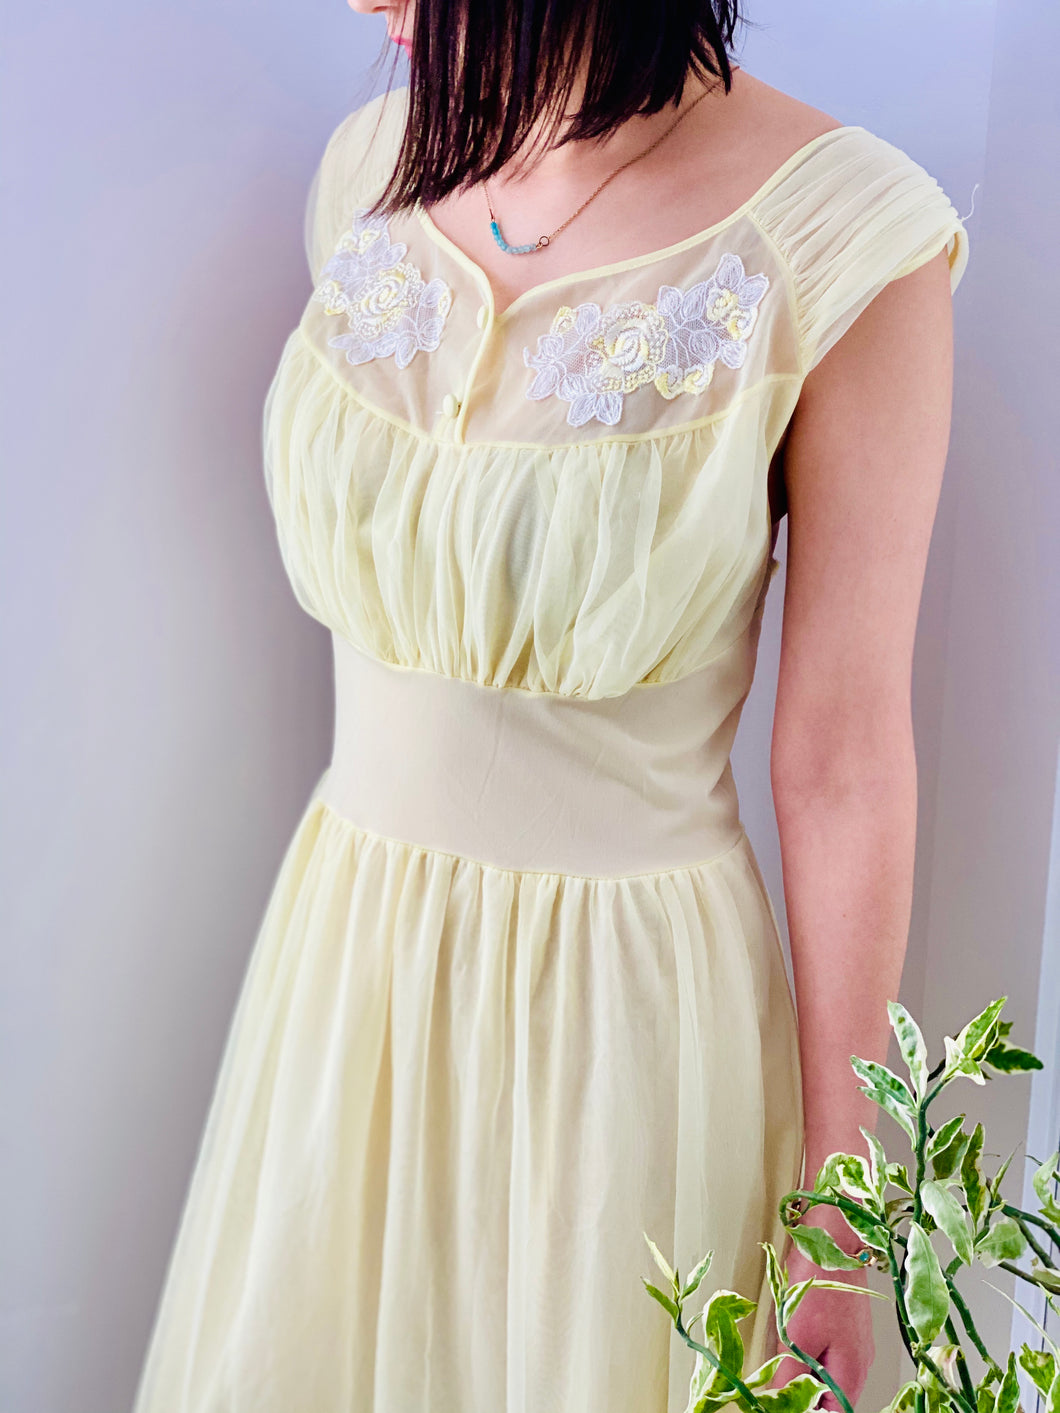 1960s Yellow sheer lingerie gown with embroidered flowers on model